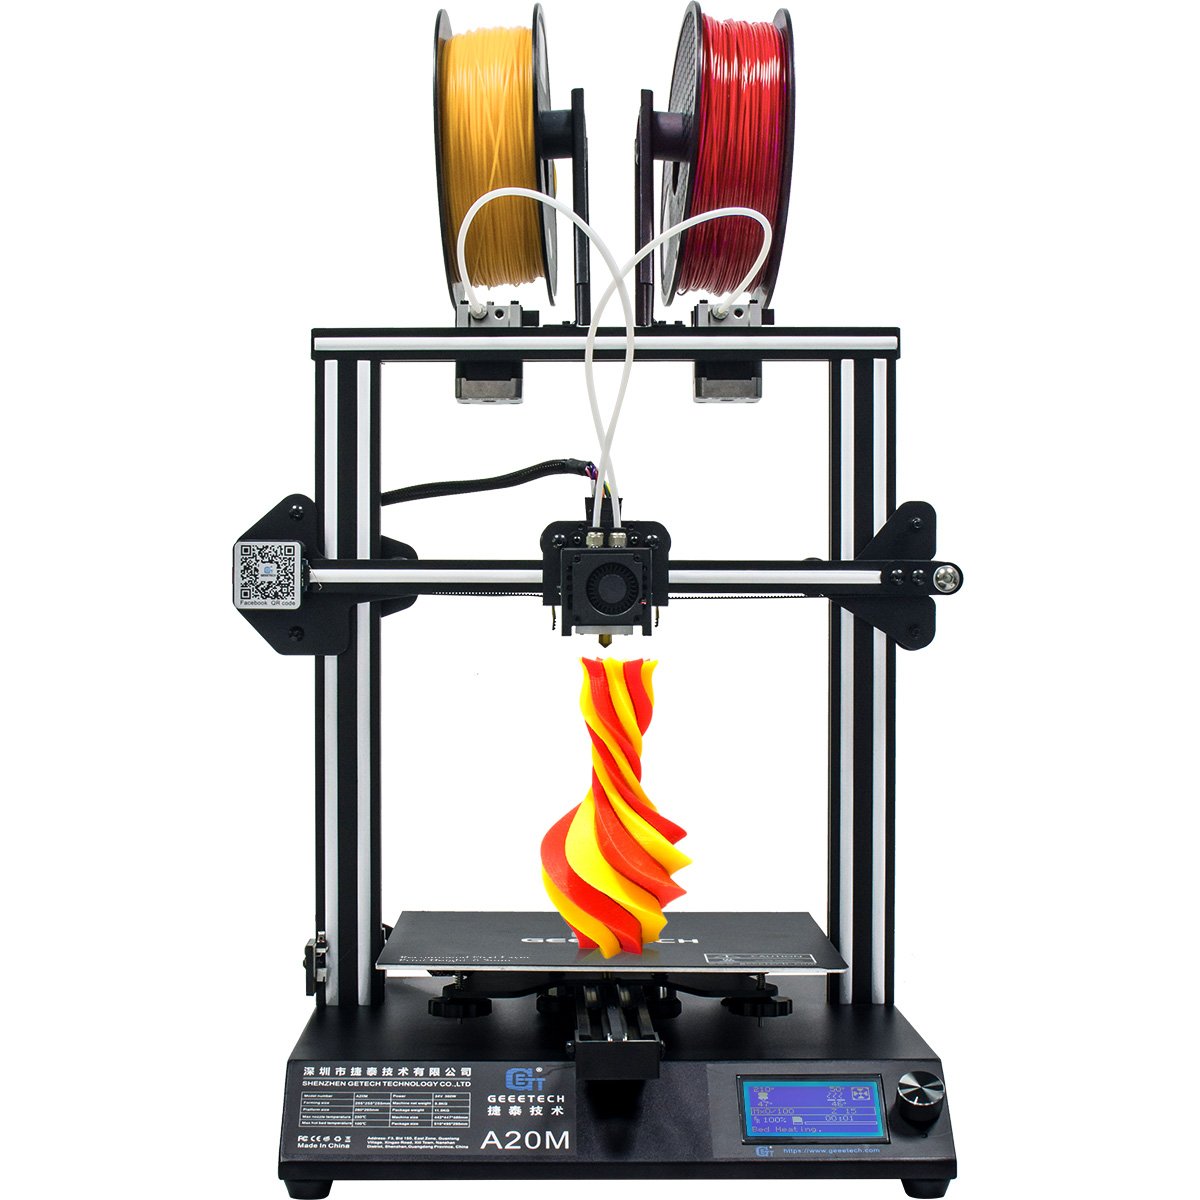 Geeetech® A20M Mix-color 3D Printer 255x255x255mm Printing Size With Filament Detector/Power Resume/Superplate Hotbed/Modular Design/360° Ventilation/ 1